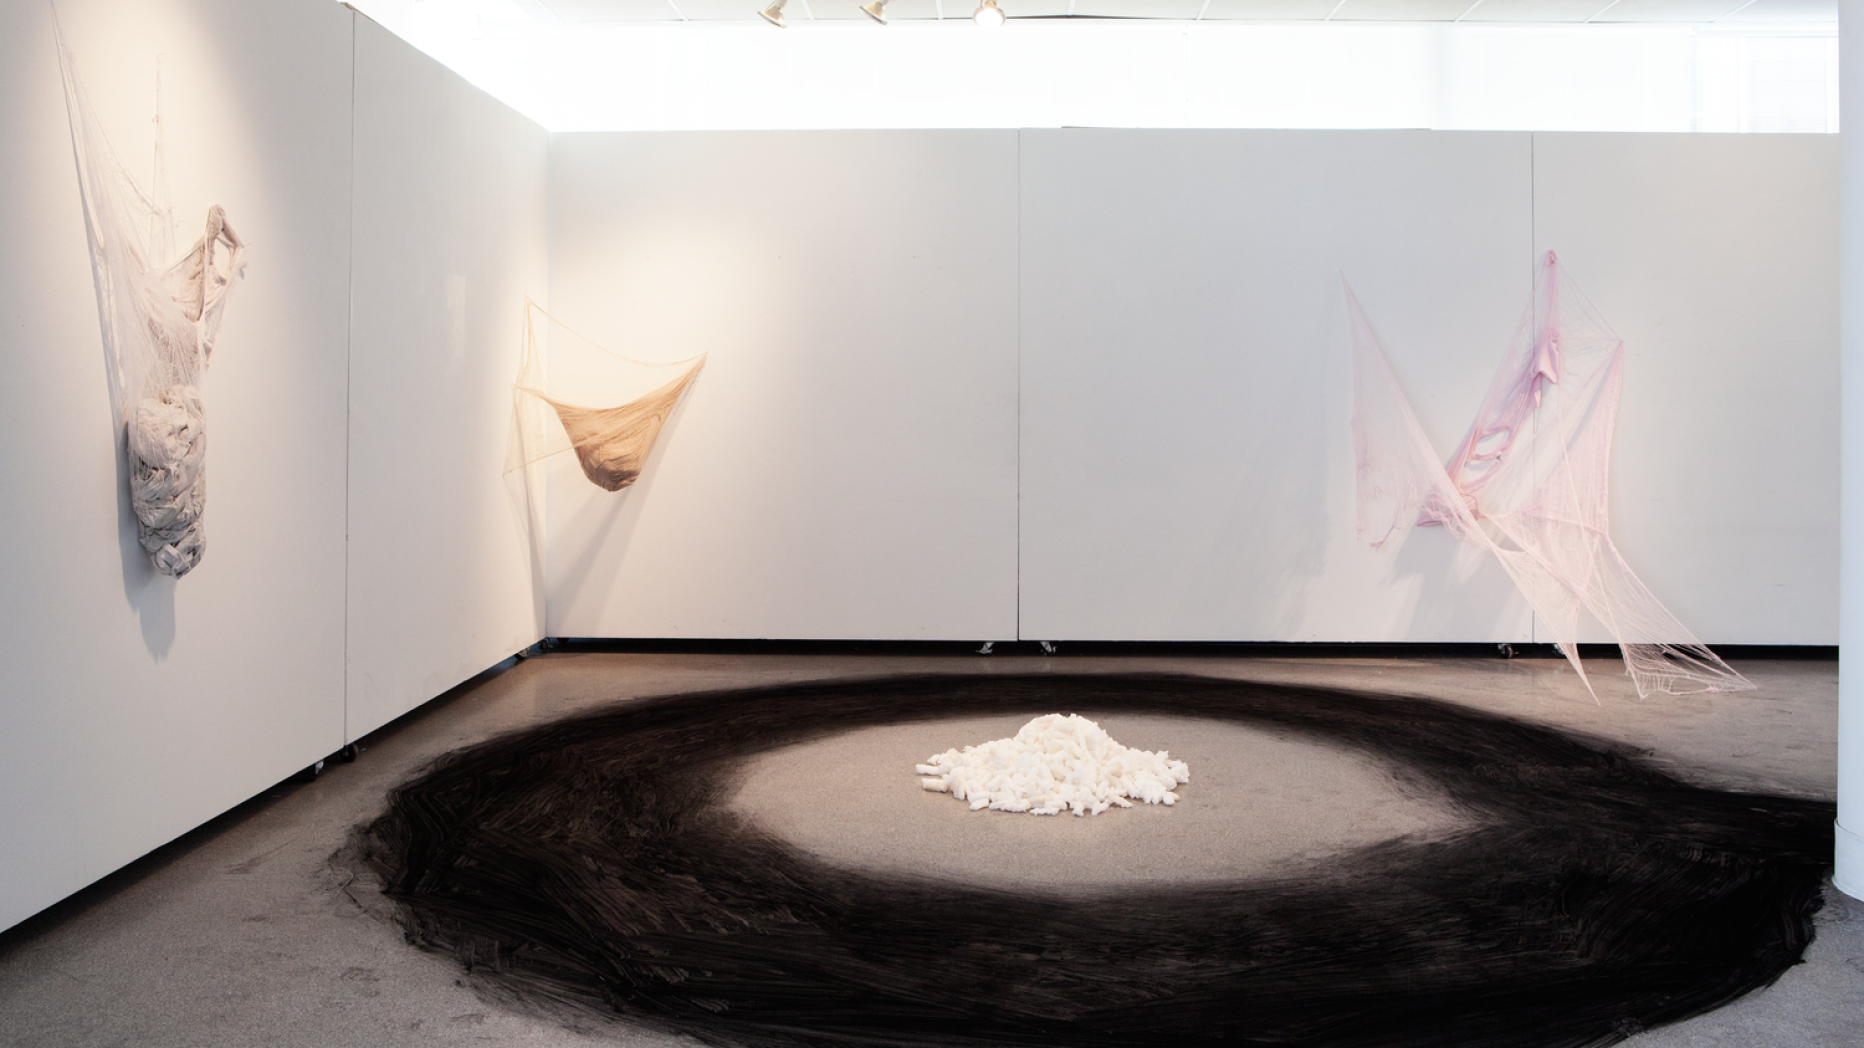 Gallery space with three pieces utilizing yarn and fiber on the wall and a large piece on the middle of the room composed of a large black ring painted on the floor with a small pile of white rocks in the center.